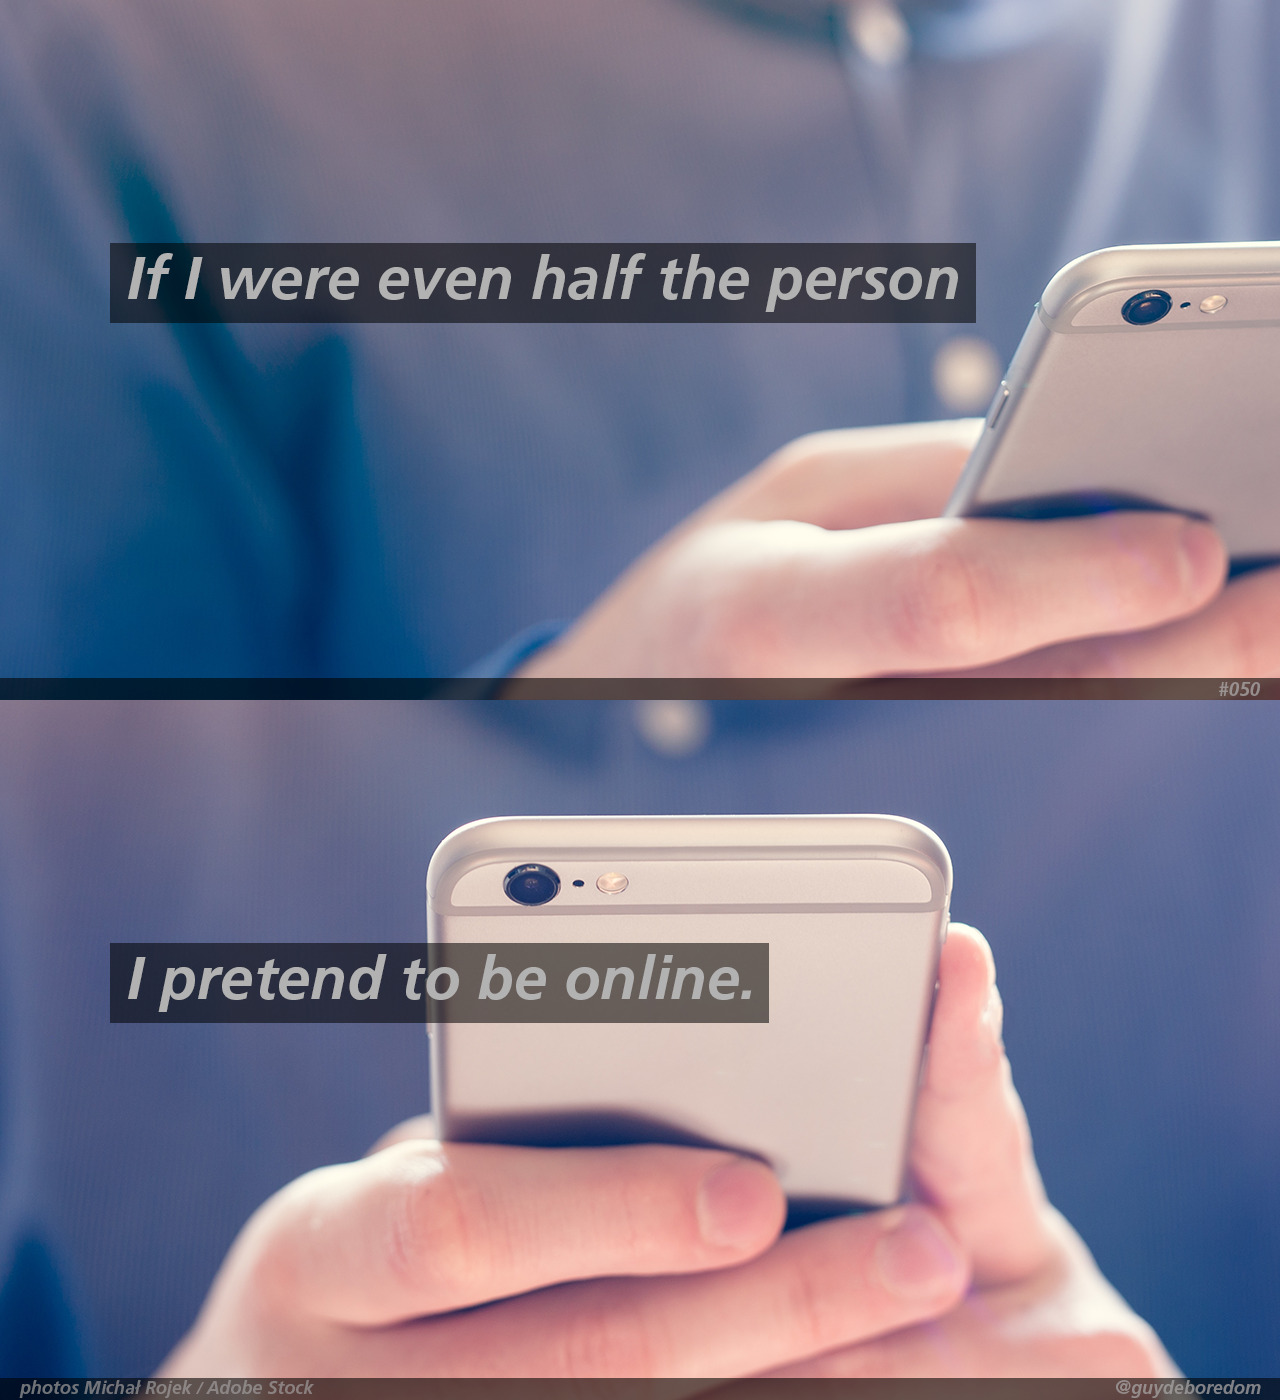 If I were even half the person I pretend to be online.